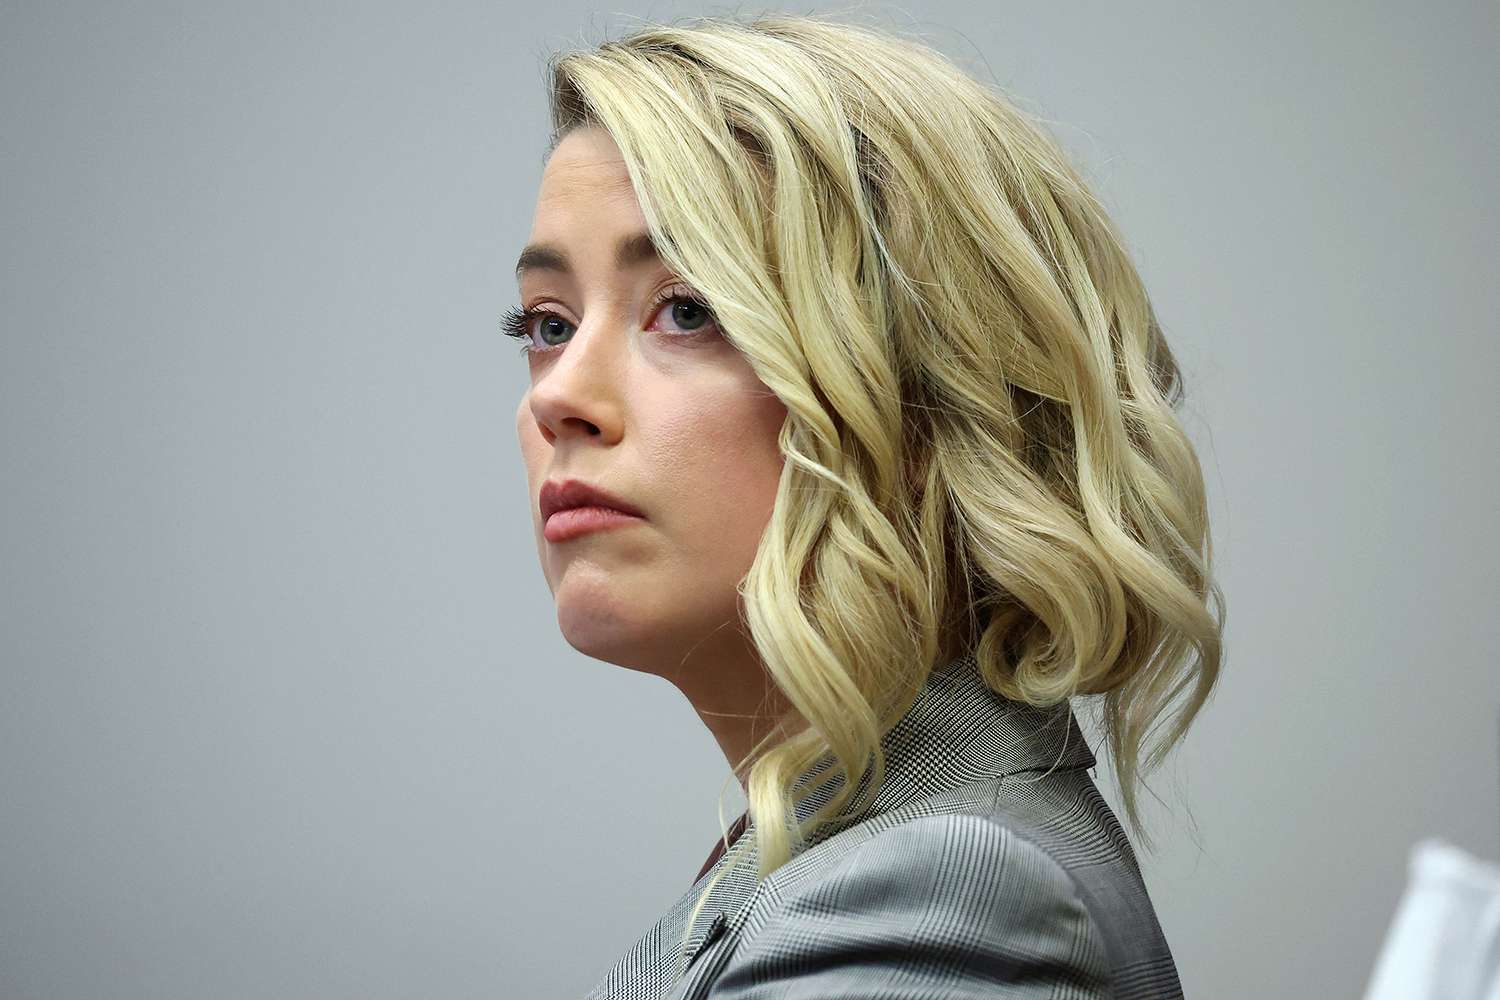 US actor Amber Heard during the 50 million US dollar Depp vs Heard defamation trial at the Fairfax County Circuit Court in Fairfax, Virginia, on May 26, 2022. - Actor Johnny Depp is suing ex-wife Amber Heard for libel after she wrote an op-ed piece in The Washington Post in 2018 referring to herself as a public figure representing domestic abuse.